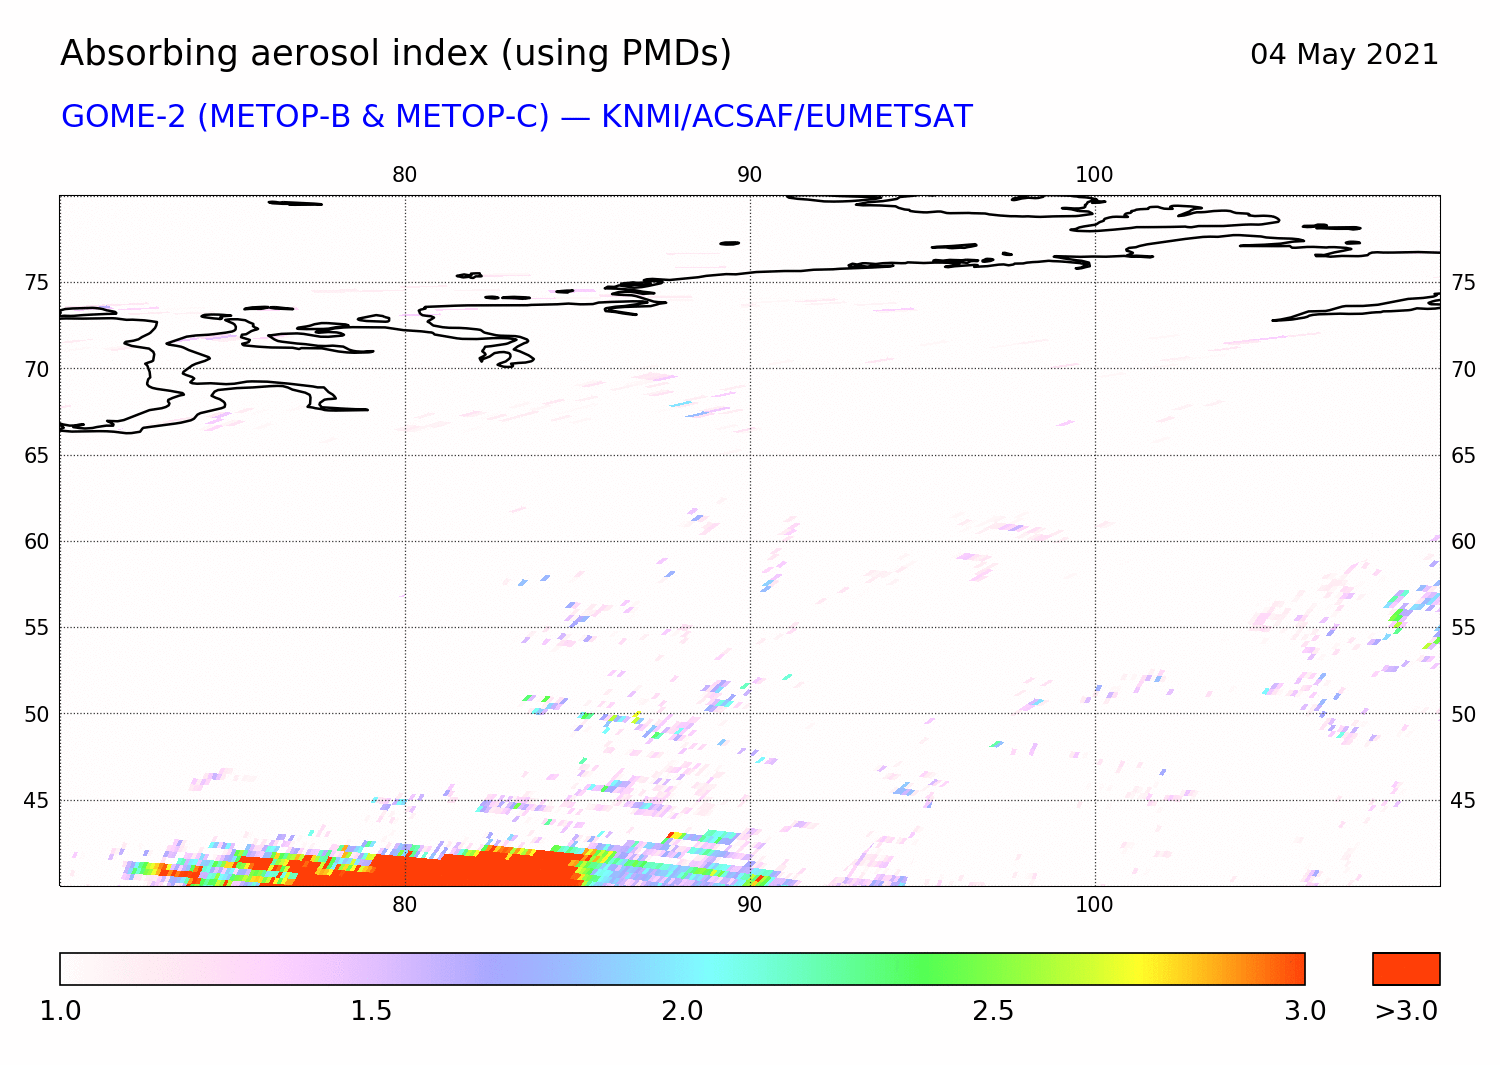 GOME-2 - Absorbing aerosol index of 04 May 2021